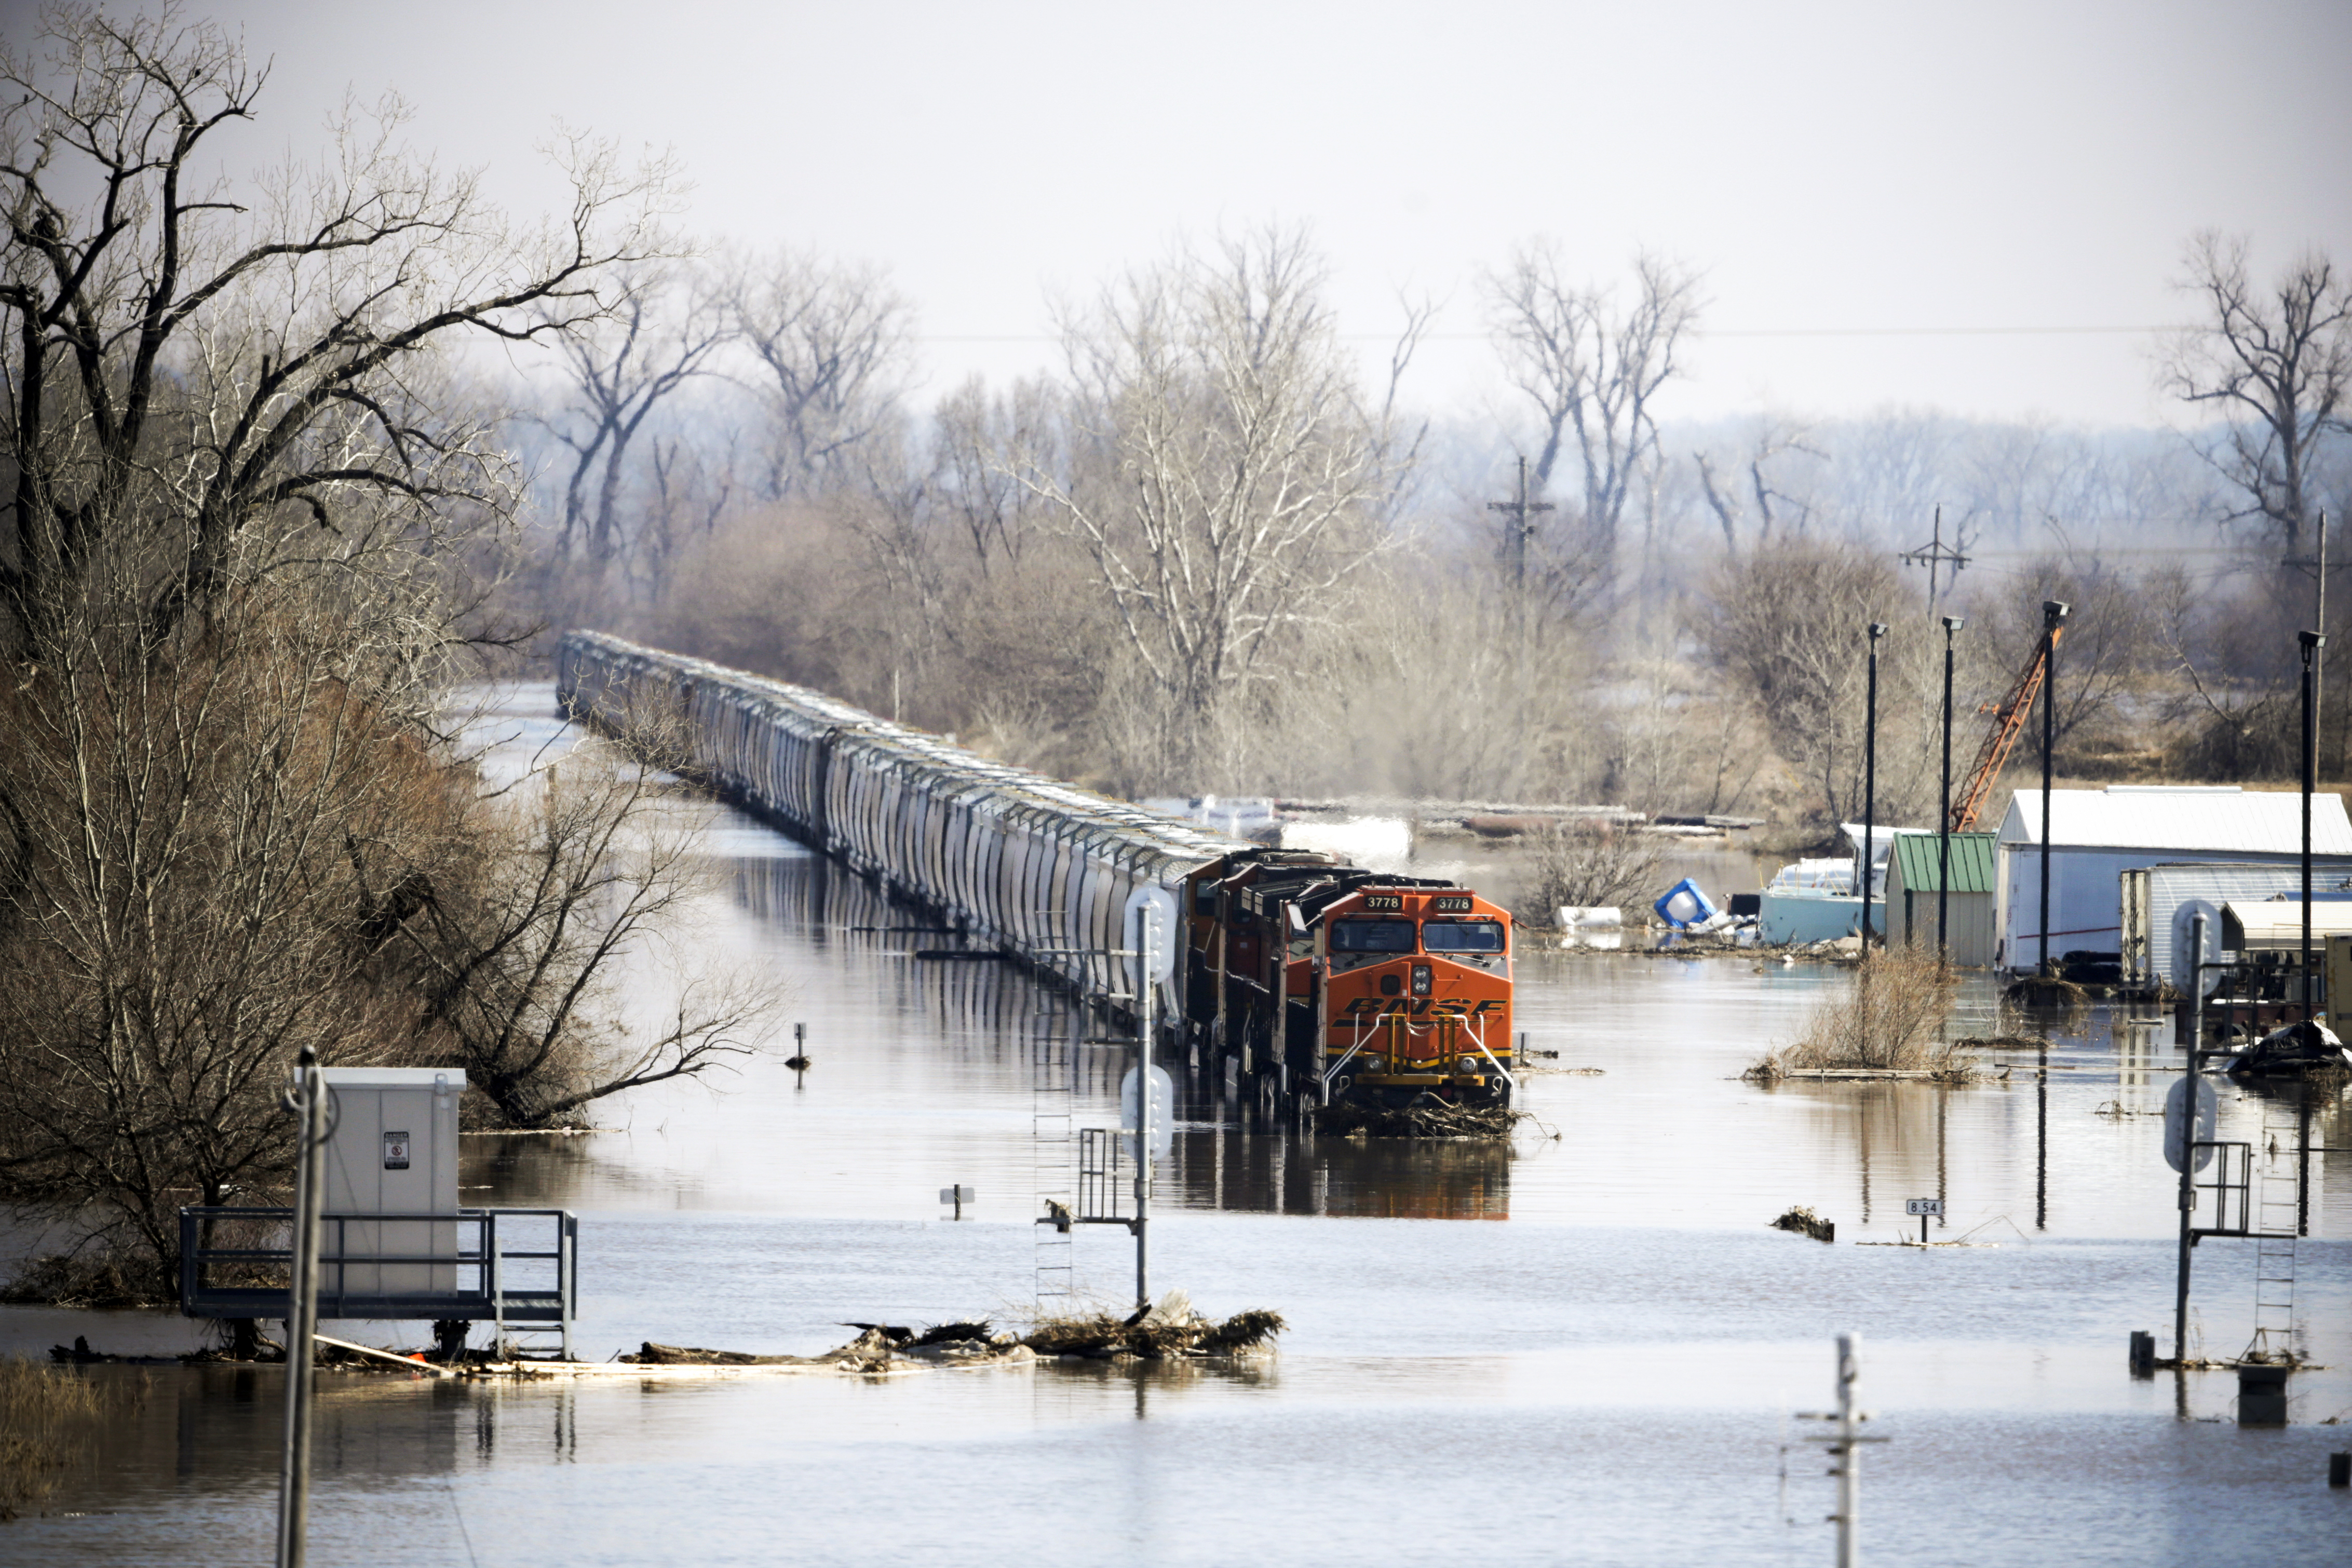 A freight train sits idle in flood waters from the Platte River, in Plattsmouth, Nebraska on March 17, 2019.